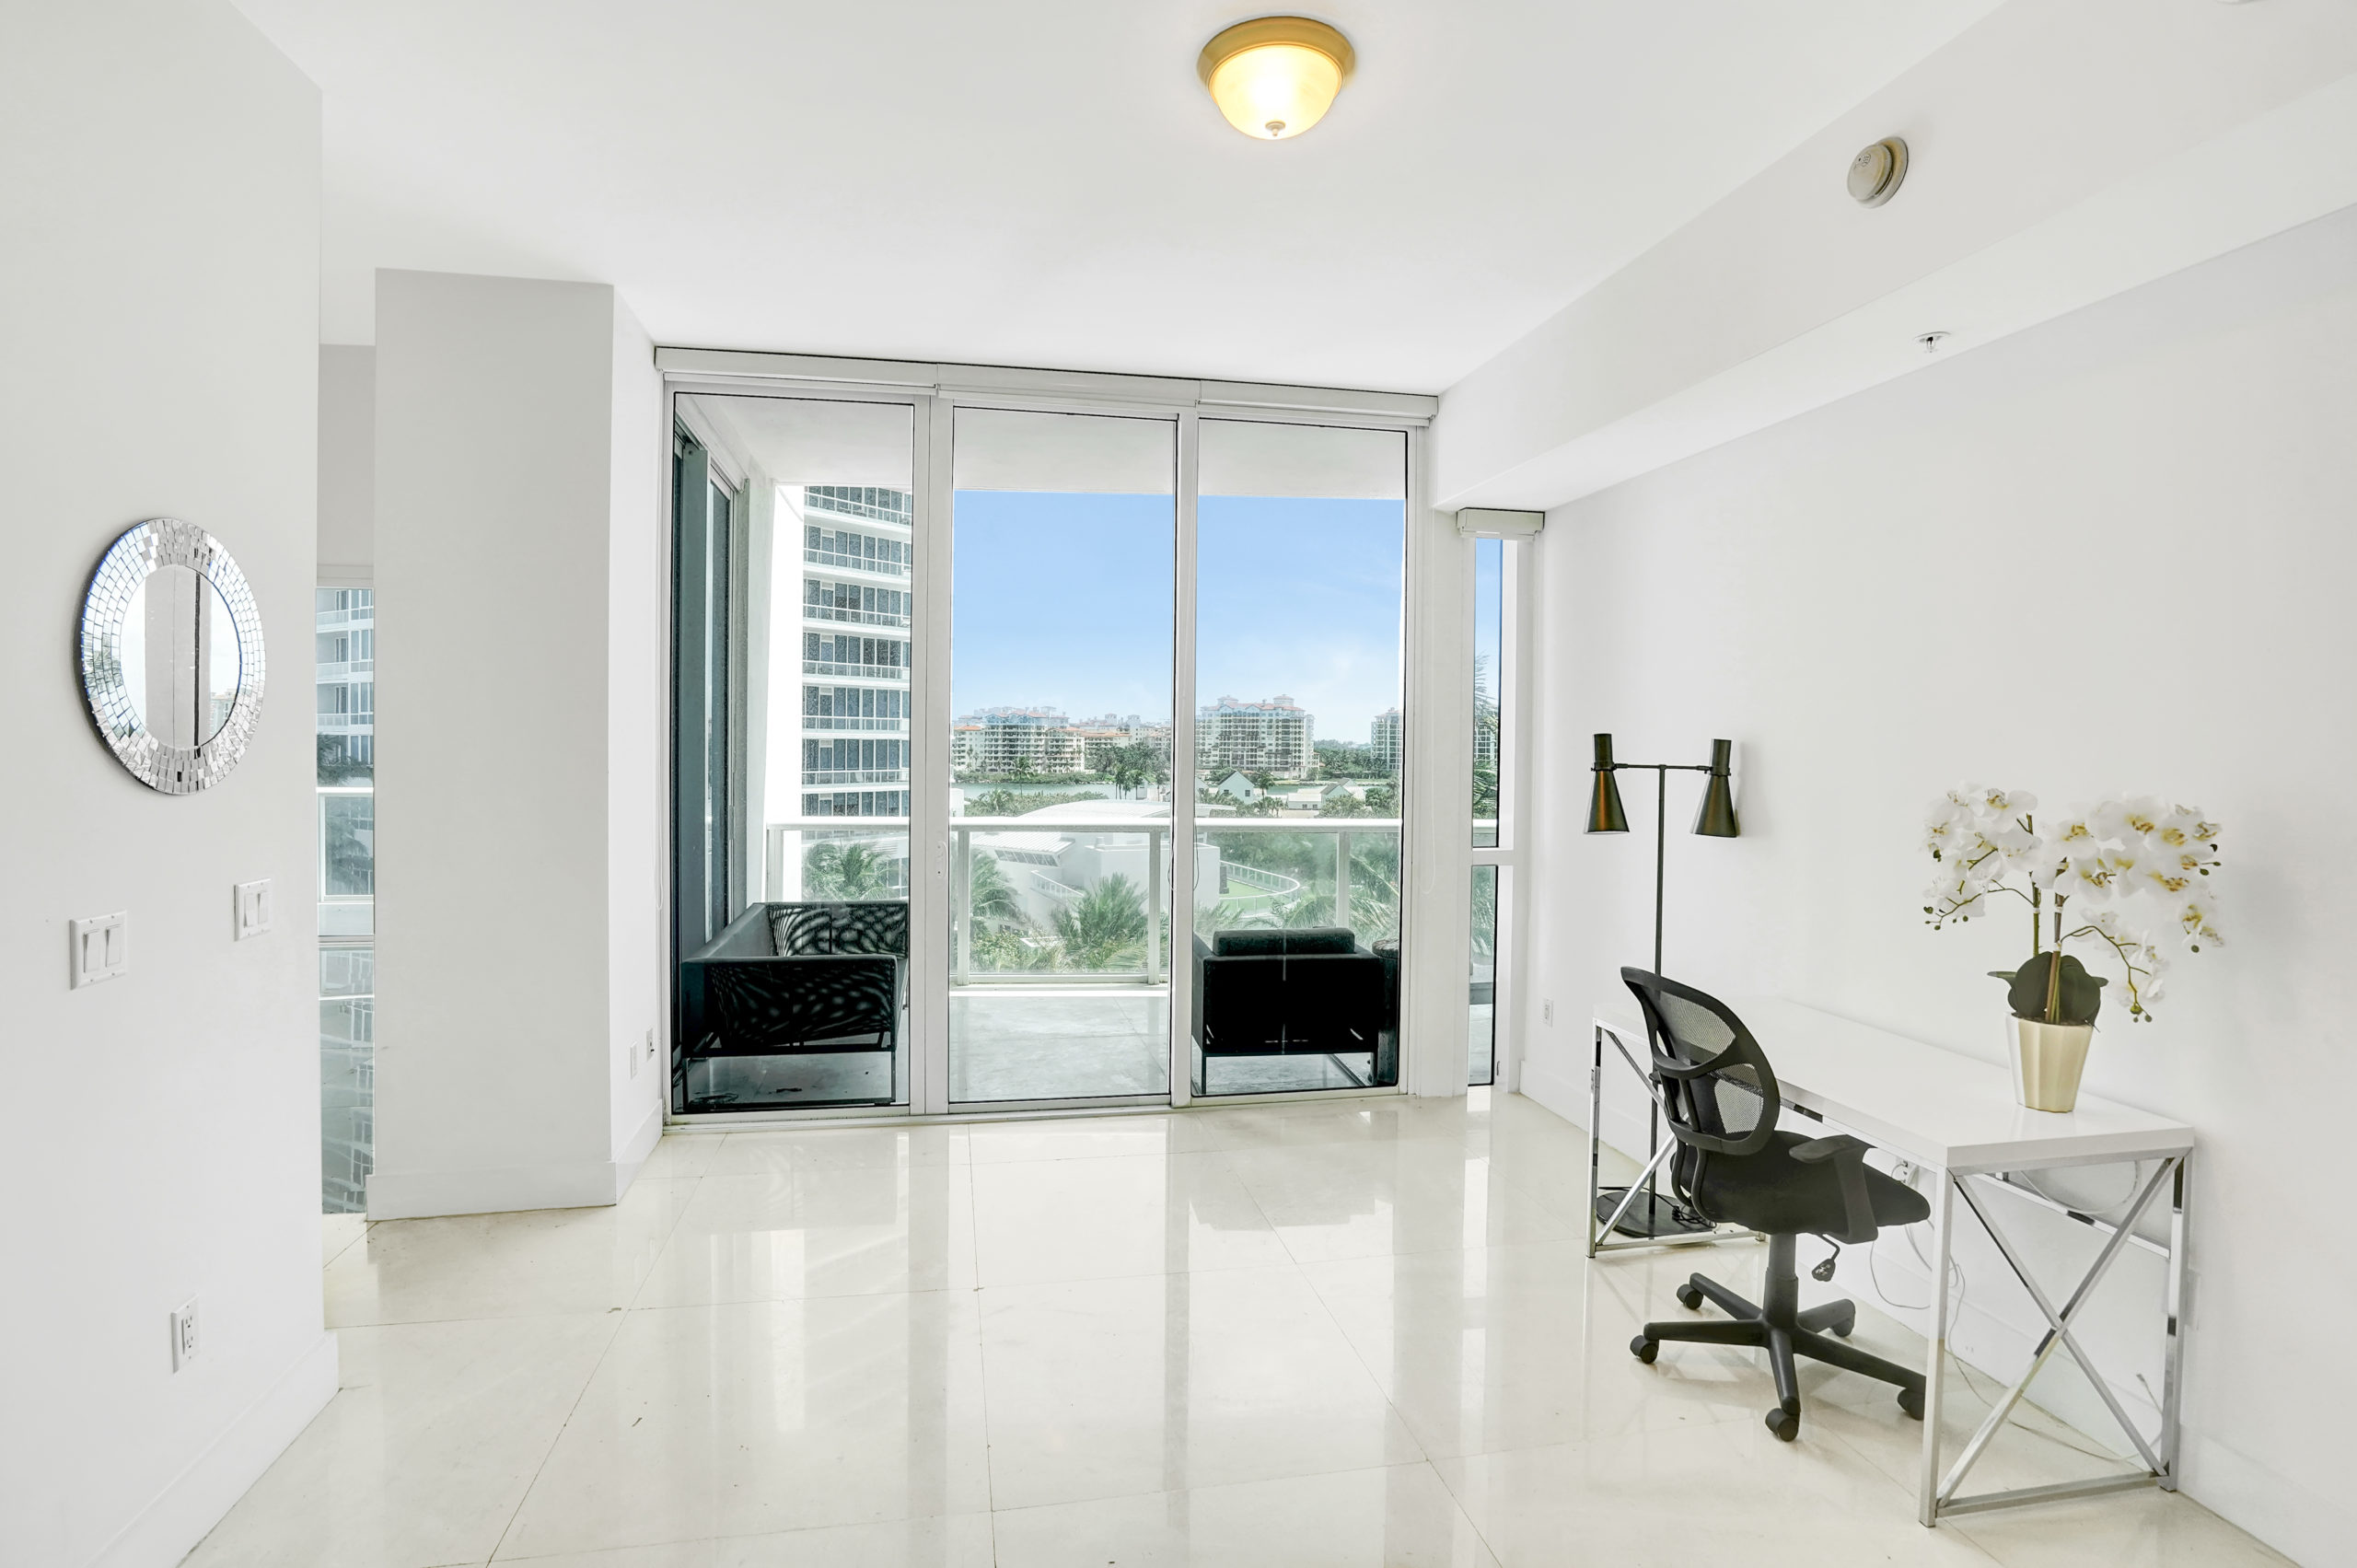 Continuum Unit for Sale: The Best Priced 2 bedroom at Continuum